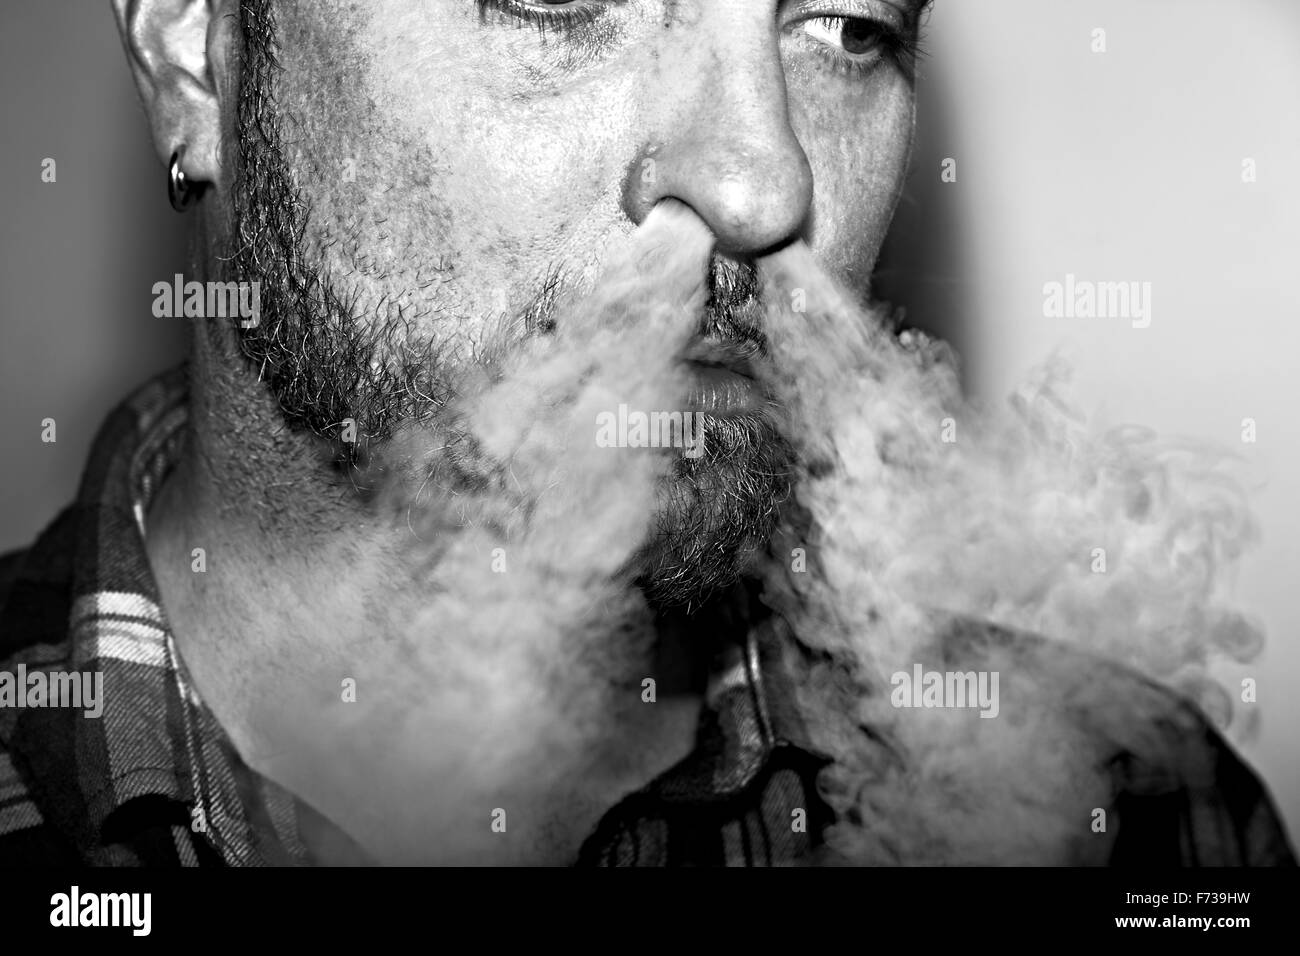 Man blowing vapor from an e-cigarette out of his nostrils. Stock Photo